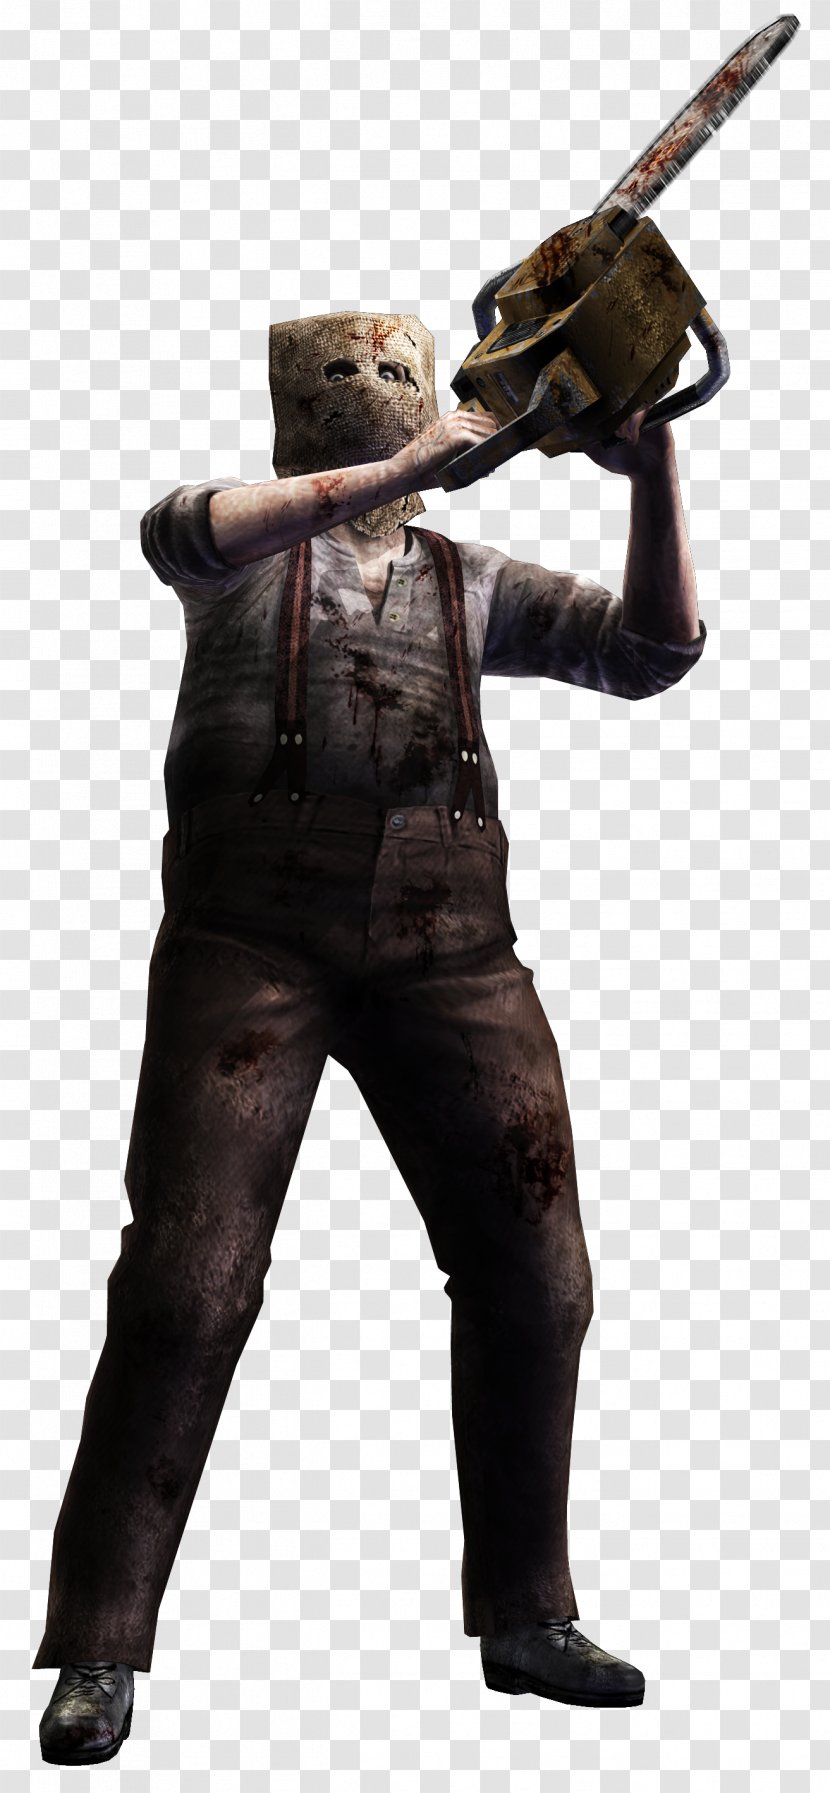 Resident Evil 4 3: Nemesis 2 Leon S. Kennedy - Chainsaw Transparent PNG